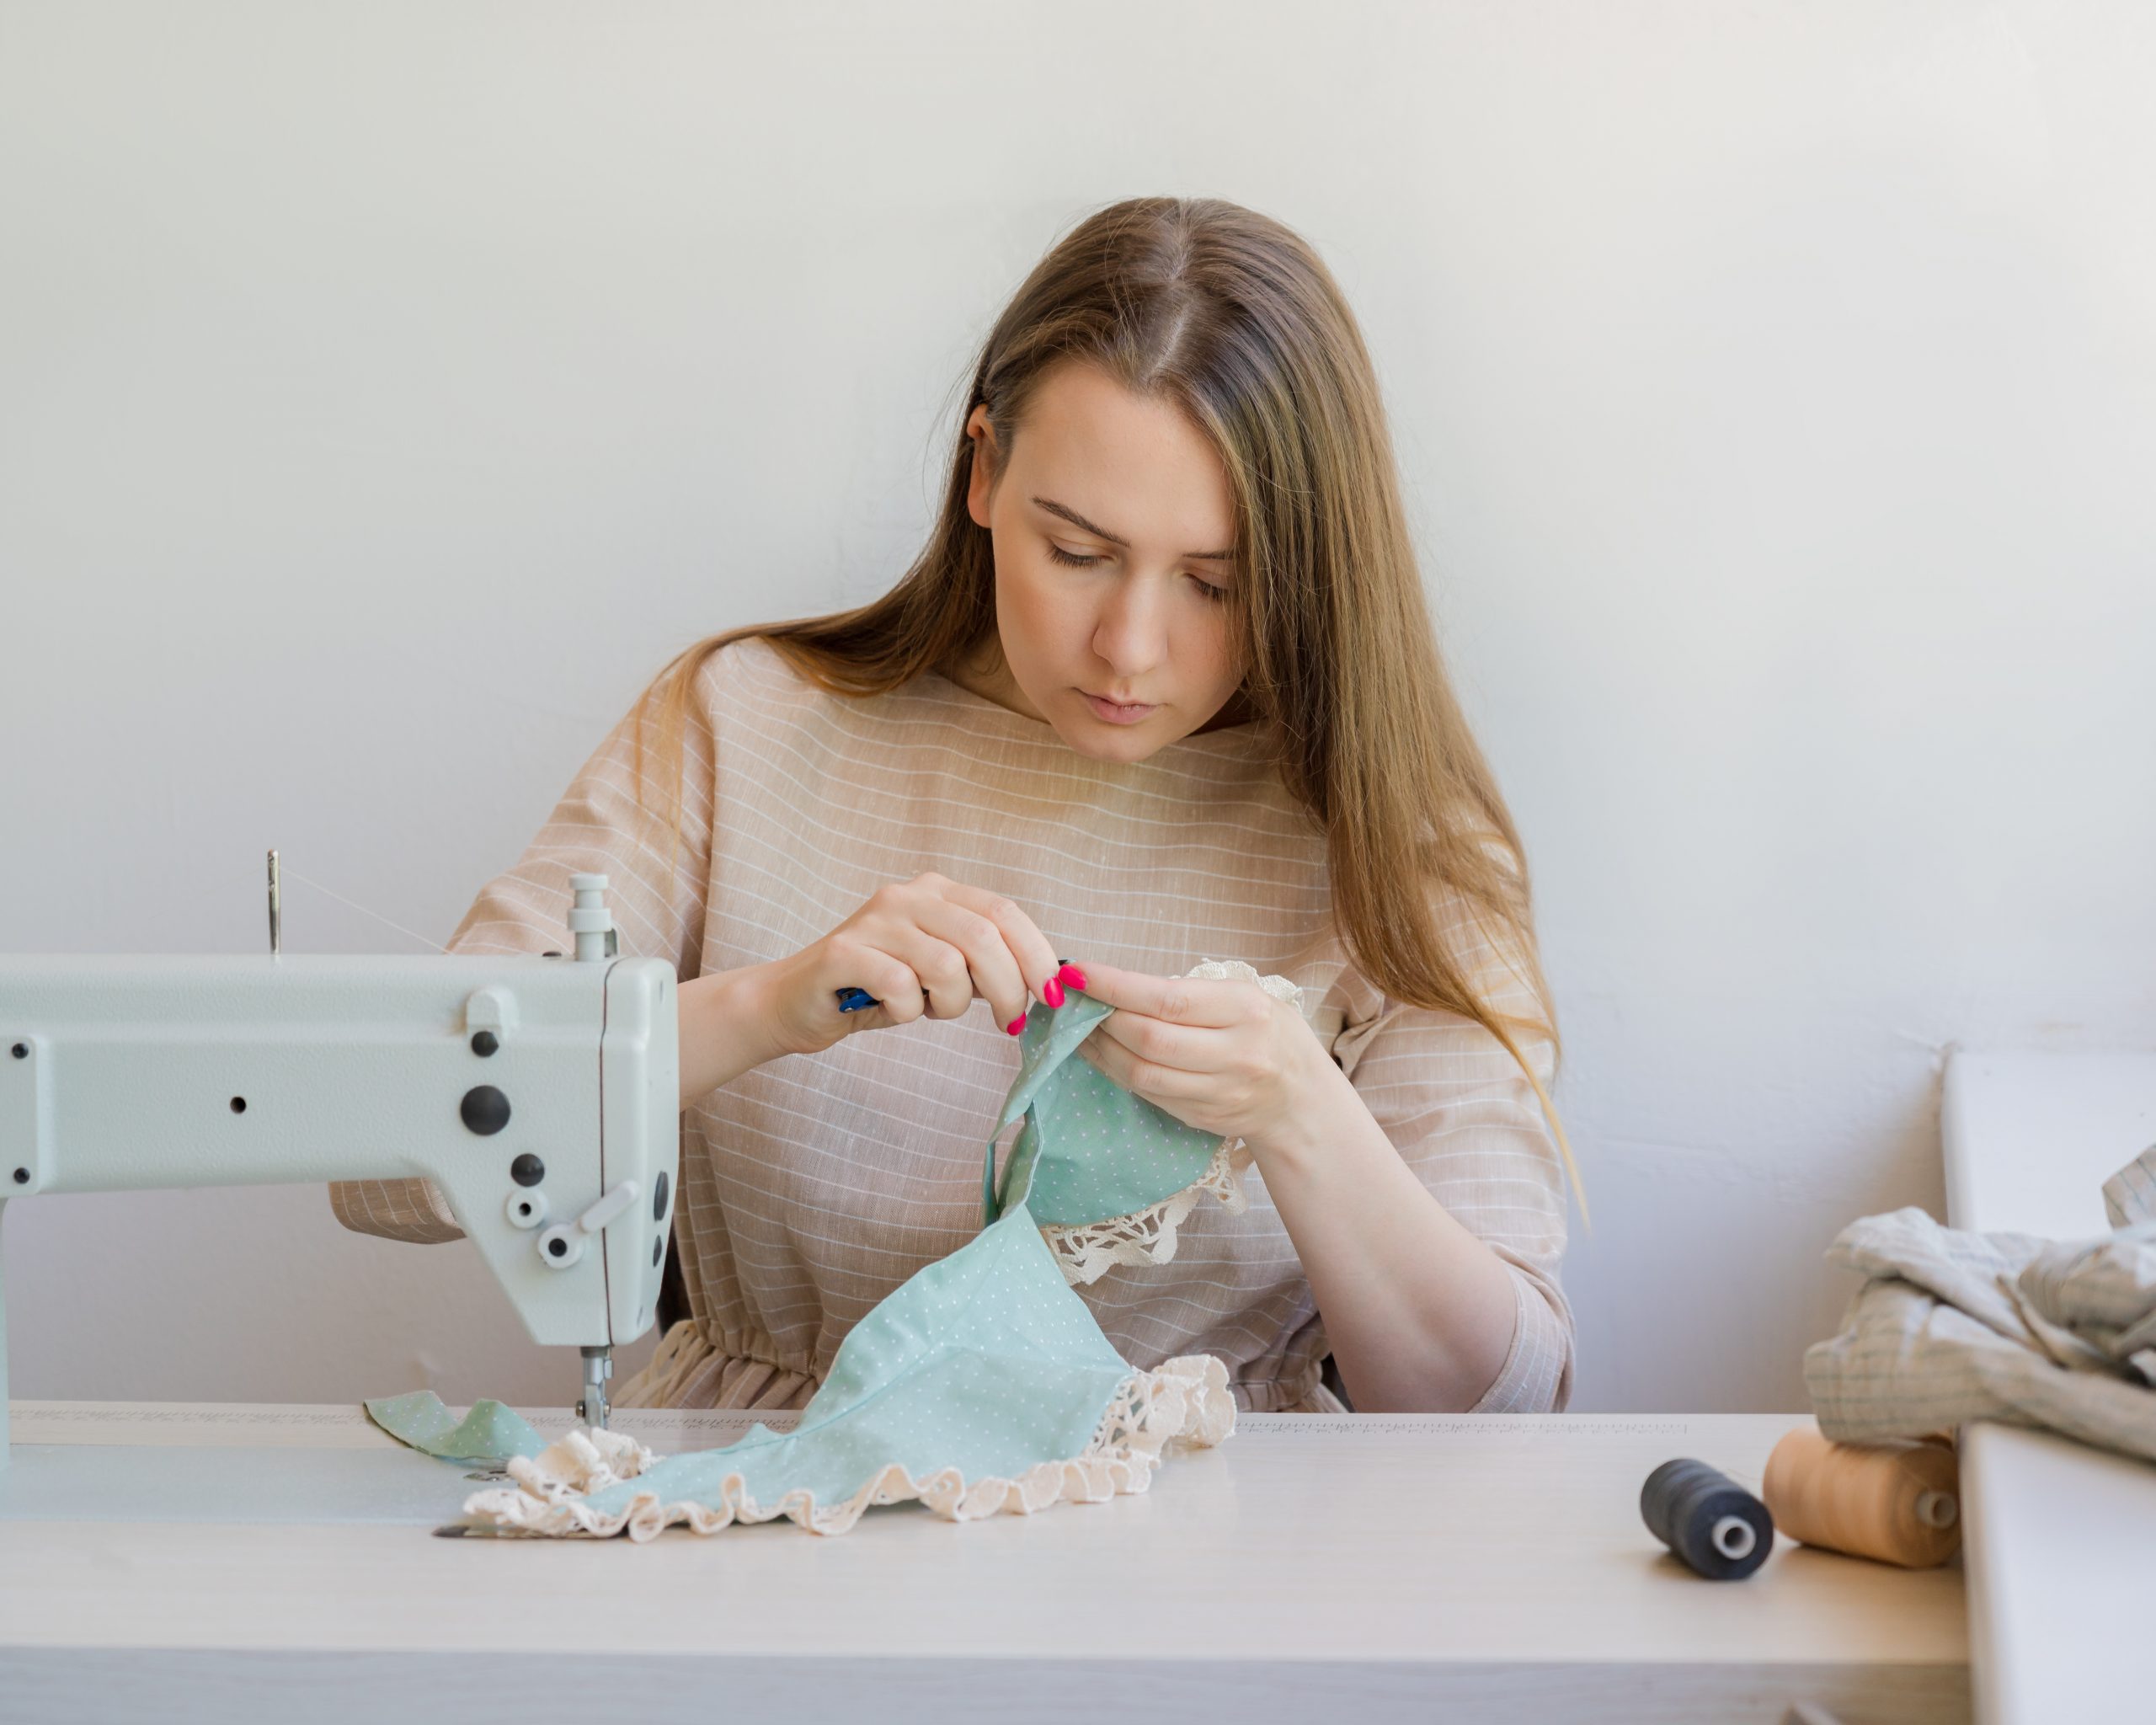 female sewing to sell her work as a side hustle